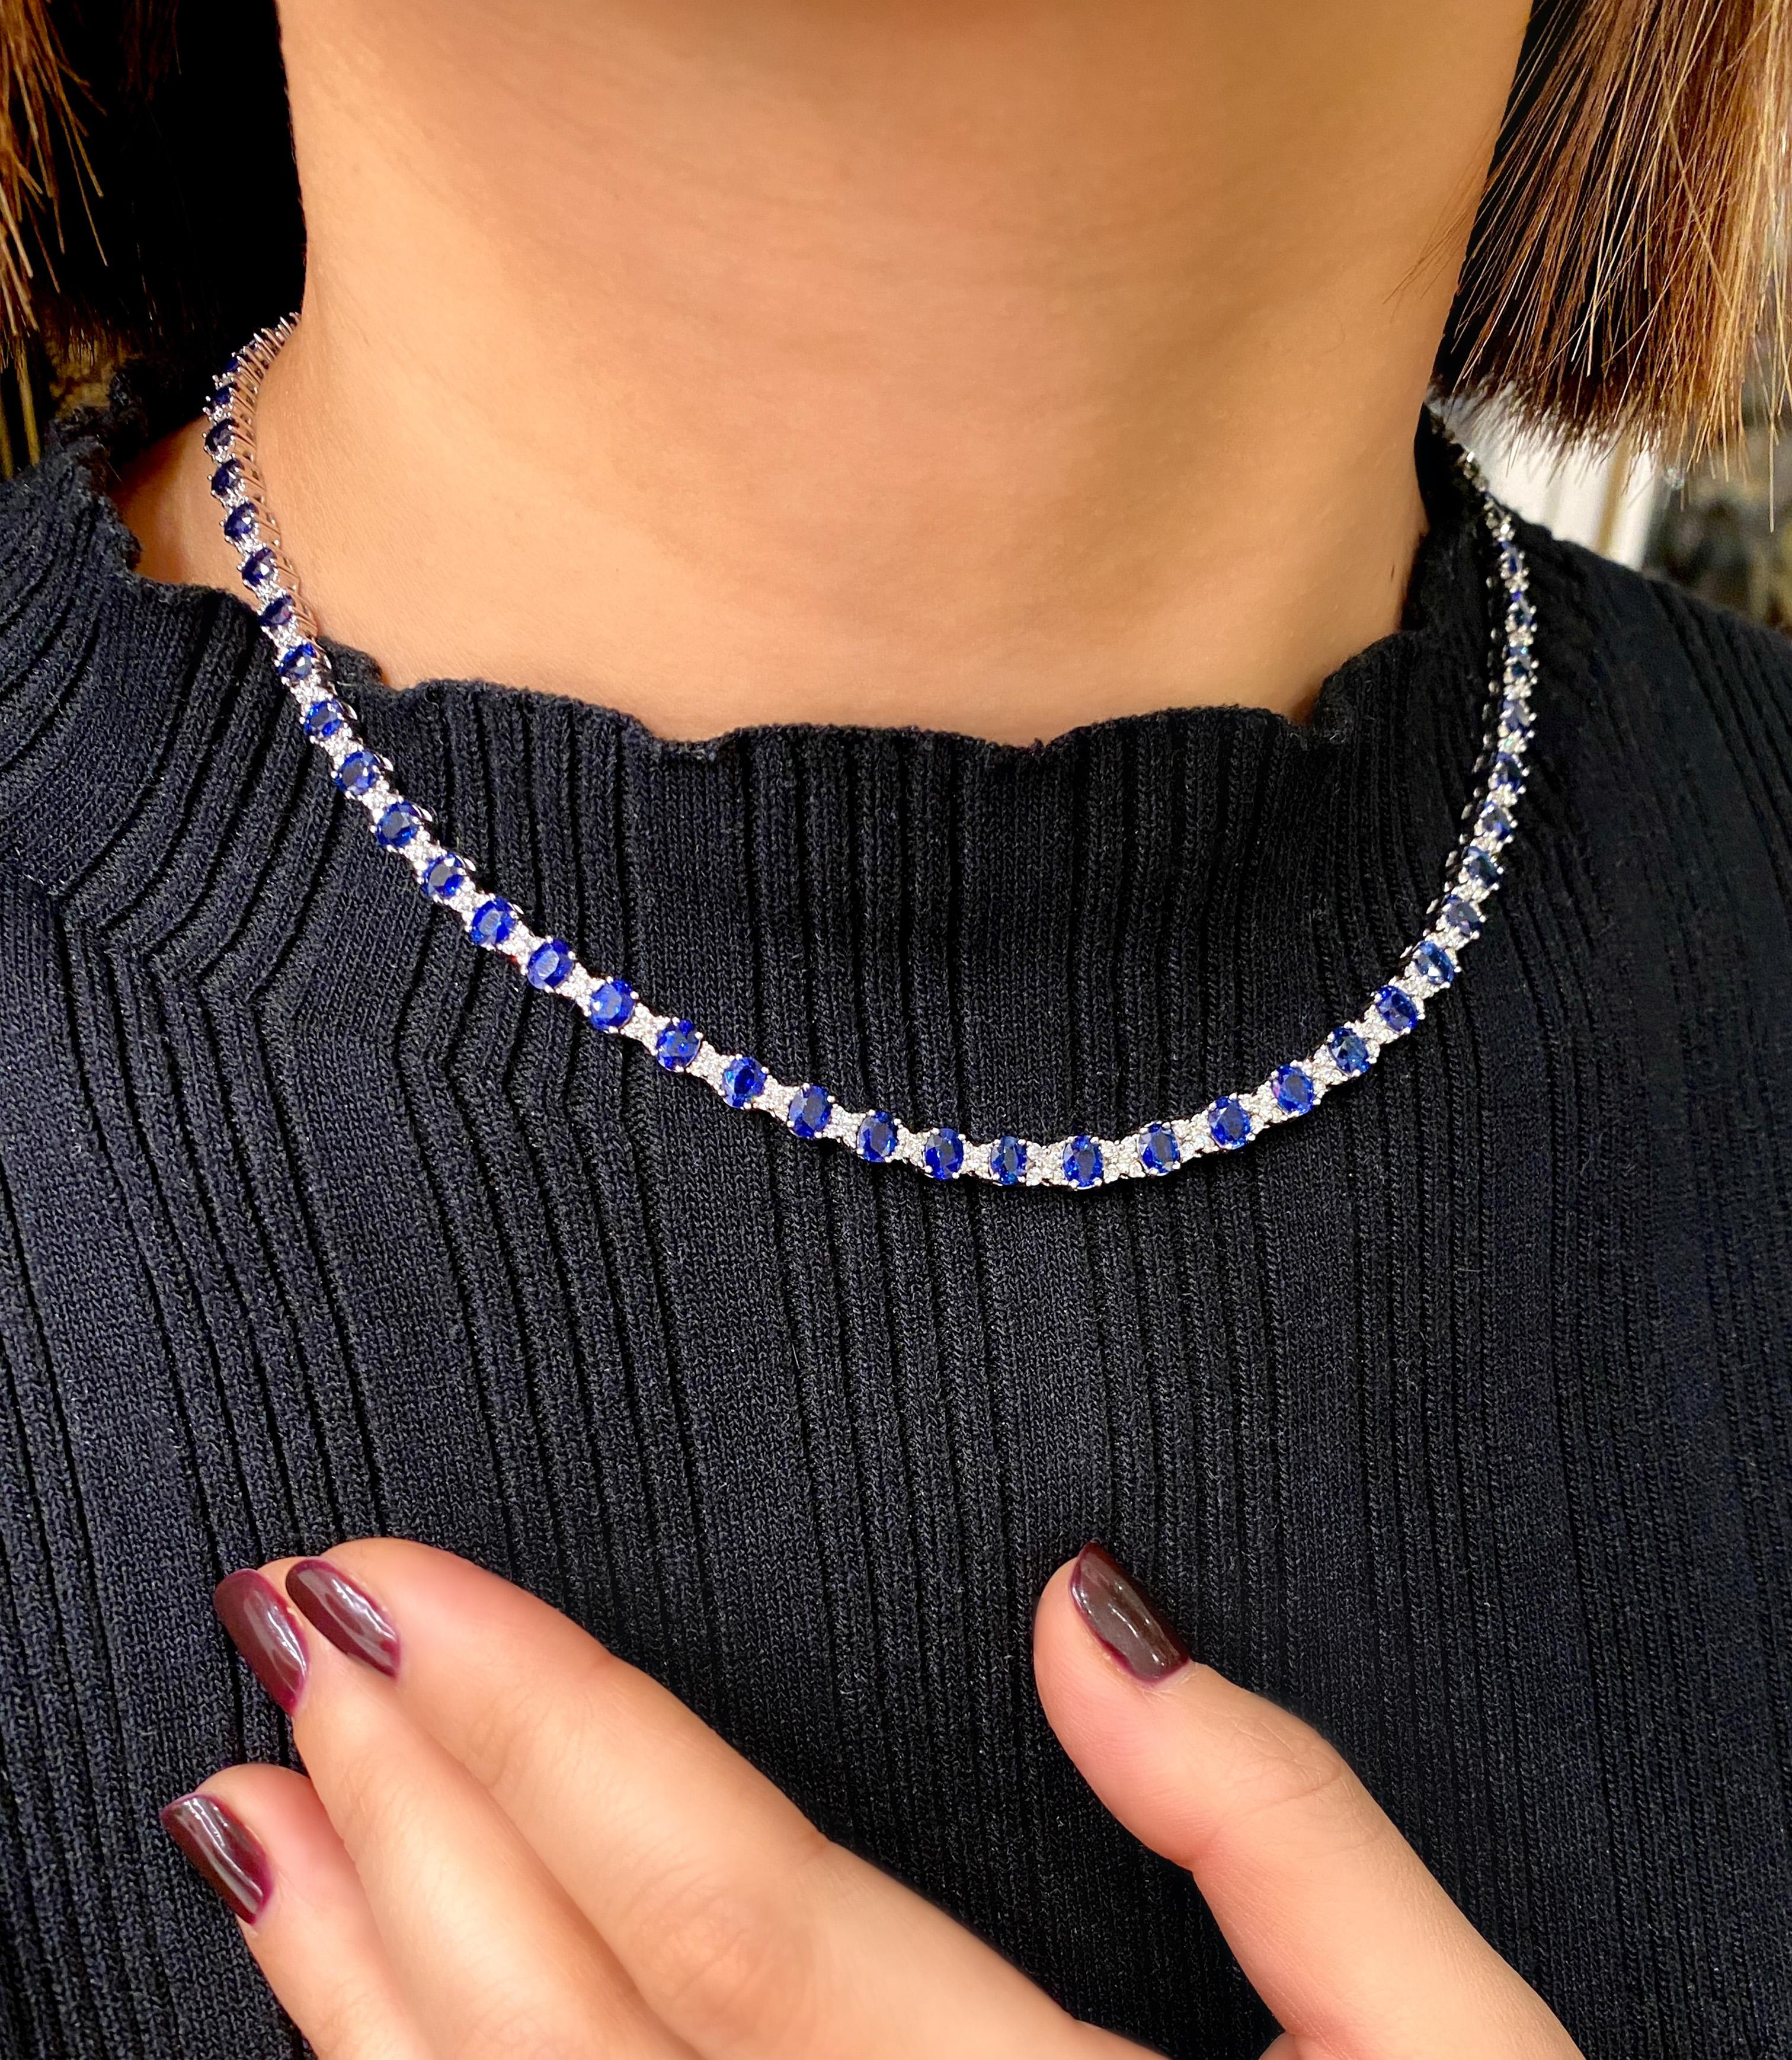 This beautiful sapphire and diamond necklace is an ode to love. It features blue sapphires set amongst diamonds which form the X design. Beautifully created in 18K white gold – this stunning necklace contains 65 blue sapphires weighing approx. 22.87